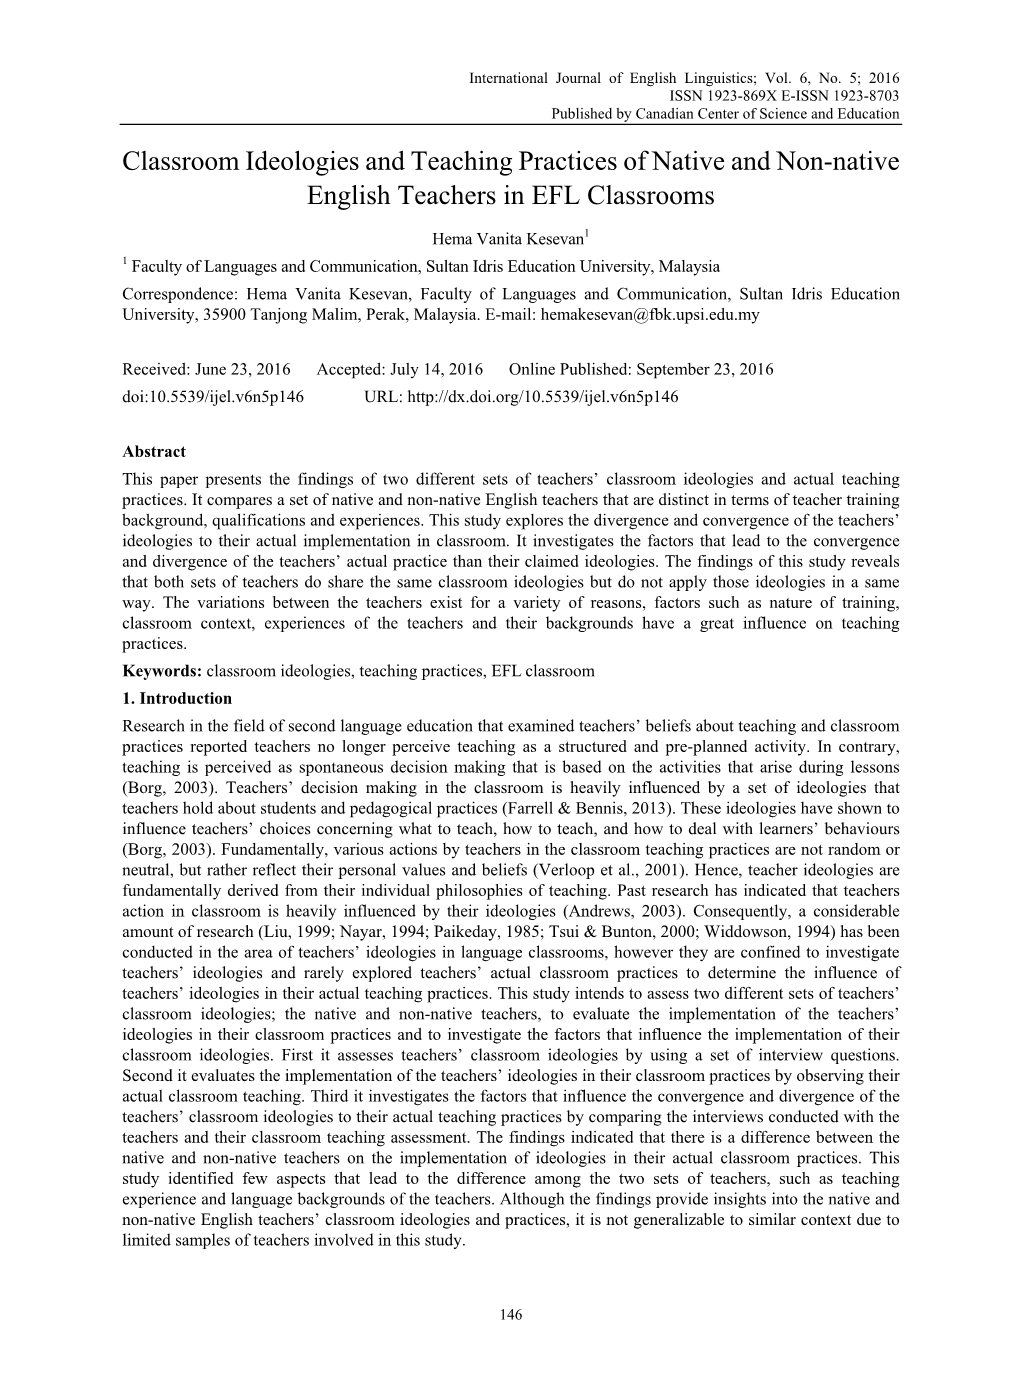 Classroom Ideologies and Teaching Practices of Native and Non-Native English Teachers in EFL Classrooms